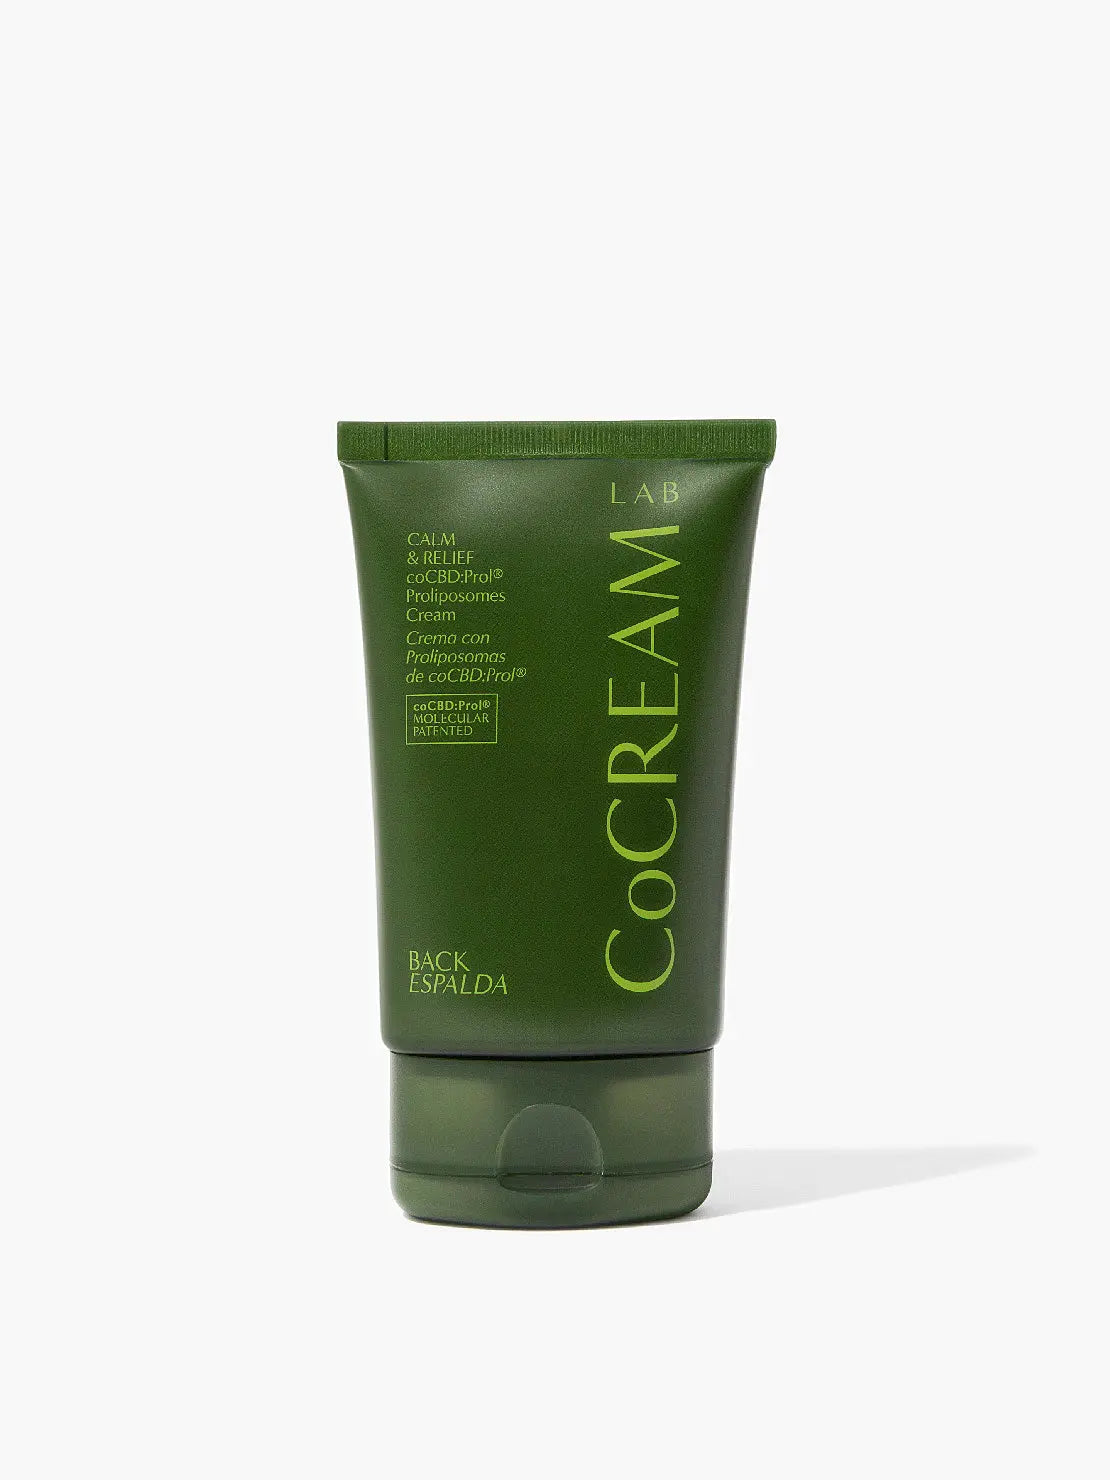 A green squeeze tube labeled "CoCream Lab" containing Back Cream 100ml is sold at Bassalstore in Barcelona. The text on the tube includes information in Spanish, mentioning features like "Calm & Relief" and "Crema con Polipéptidos." The packaging design is simple and minimalistic.